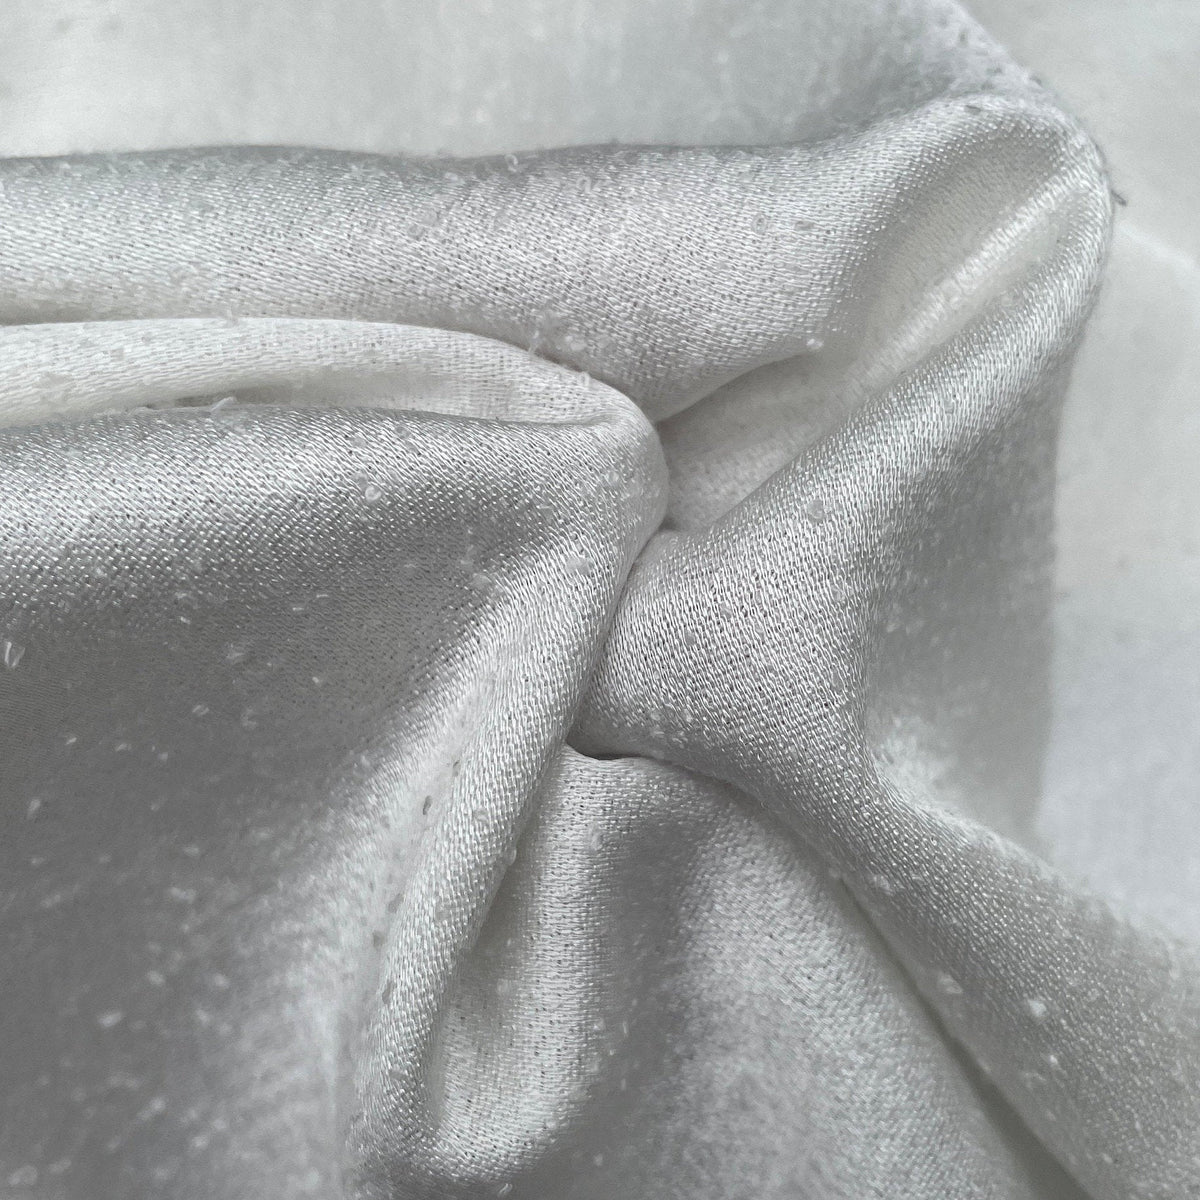 Silver Satin Fabric - by The Yard